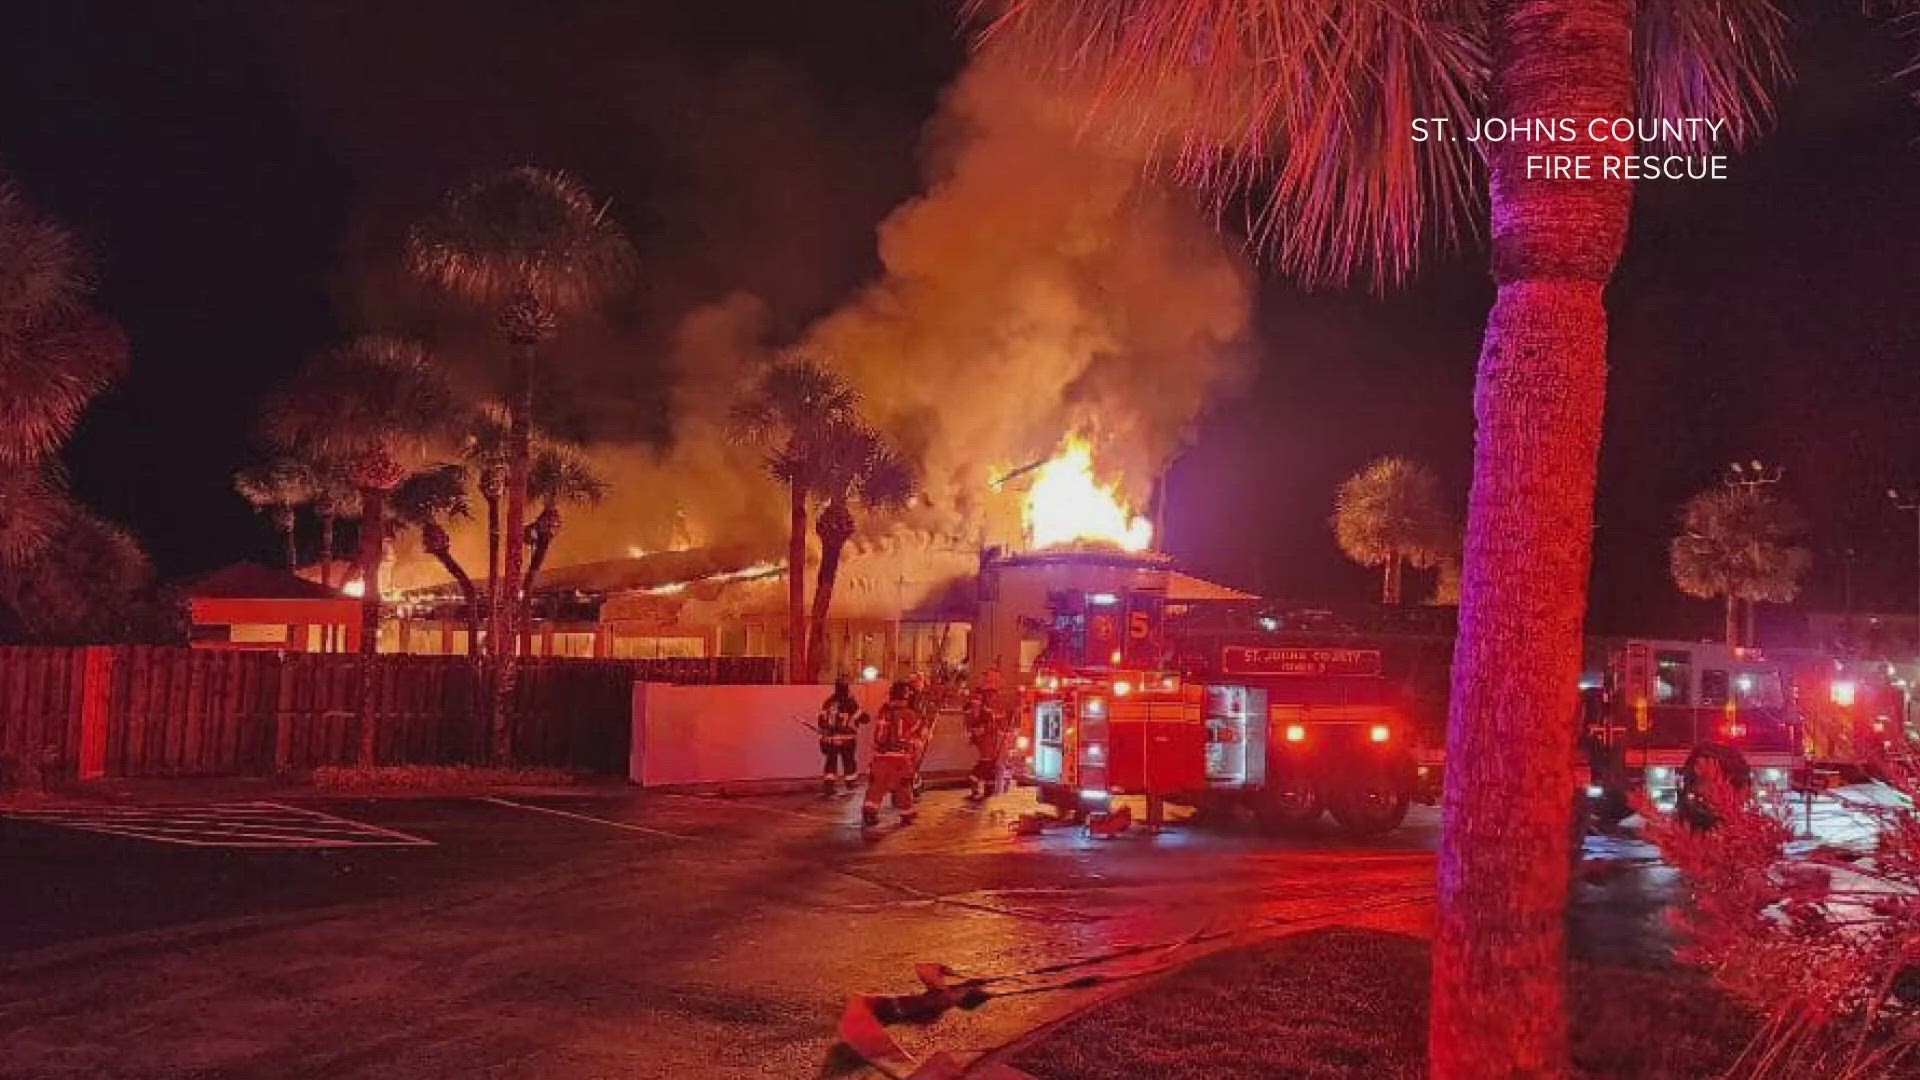 When firefighters arrived, they reported "heavy" flames both inside and outside the clubhouse. Crews extinguished the fire, no injuries were reported.